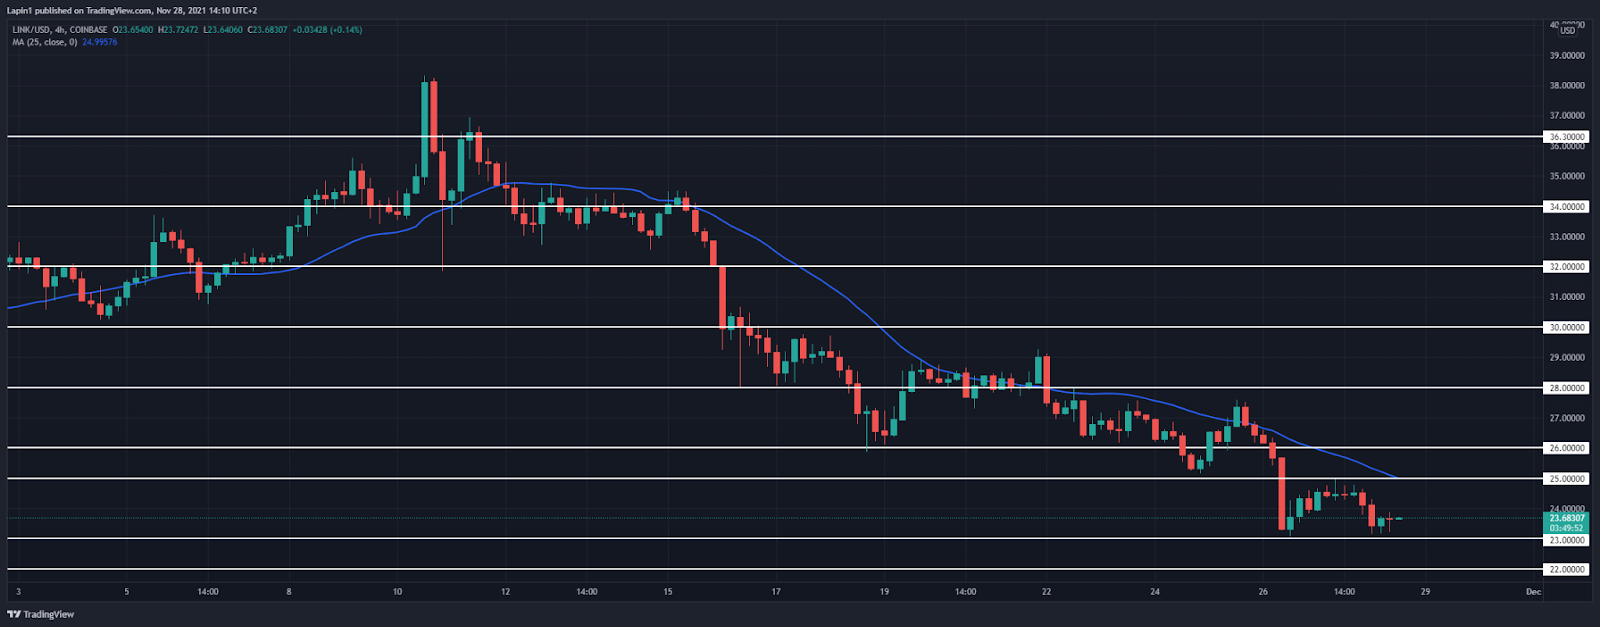 Chainlink Price Analysis: LINK tests previous low at $23, more downside to follow?